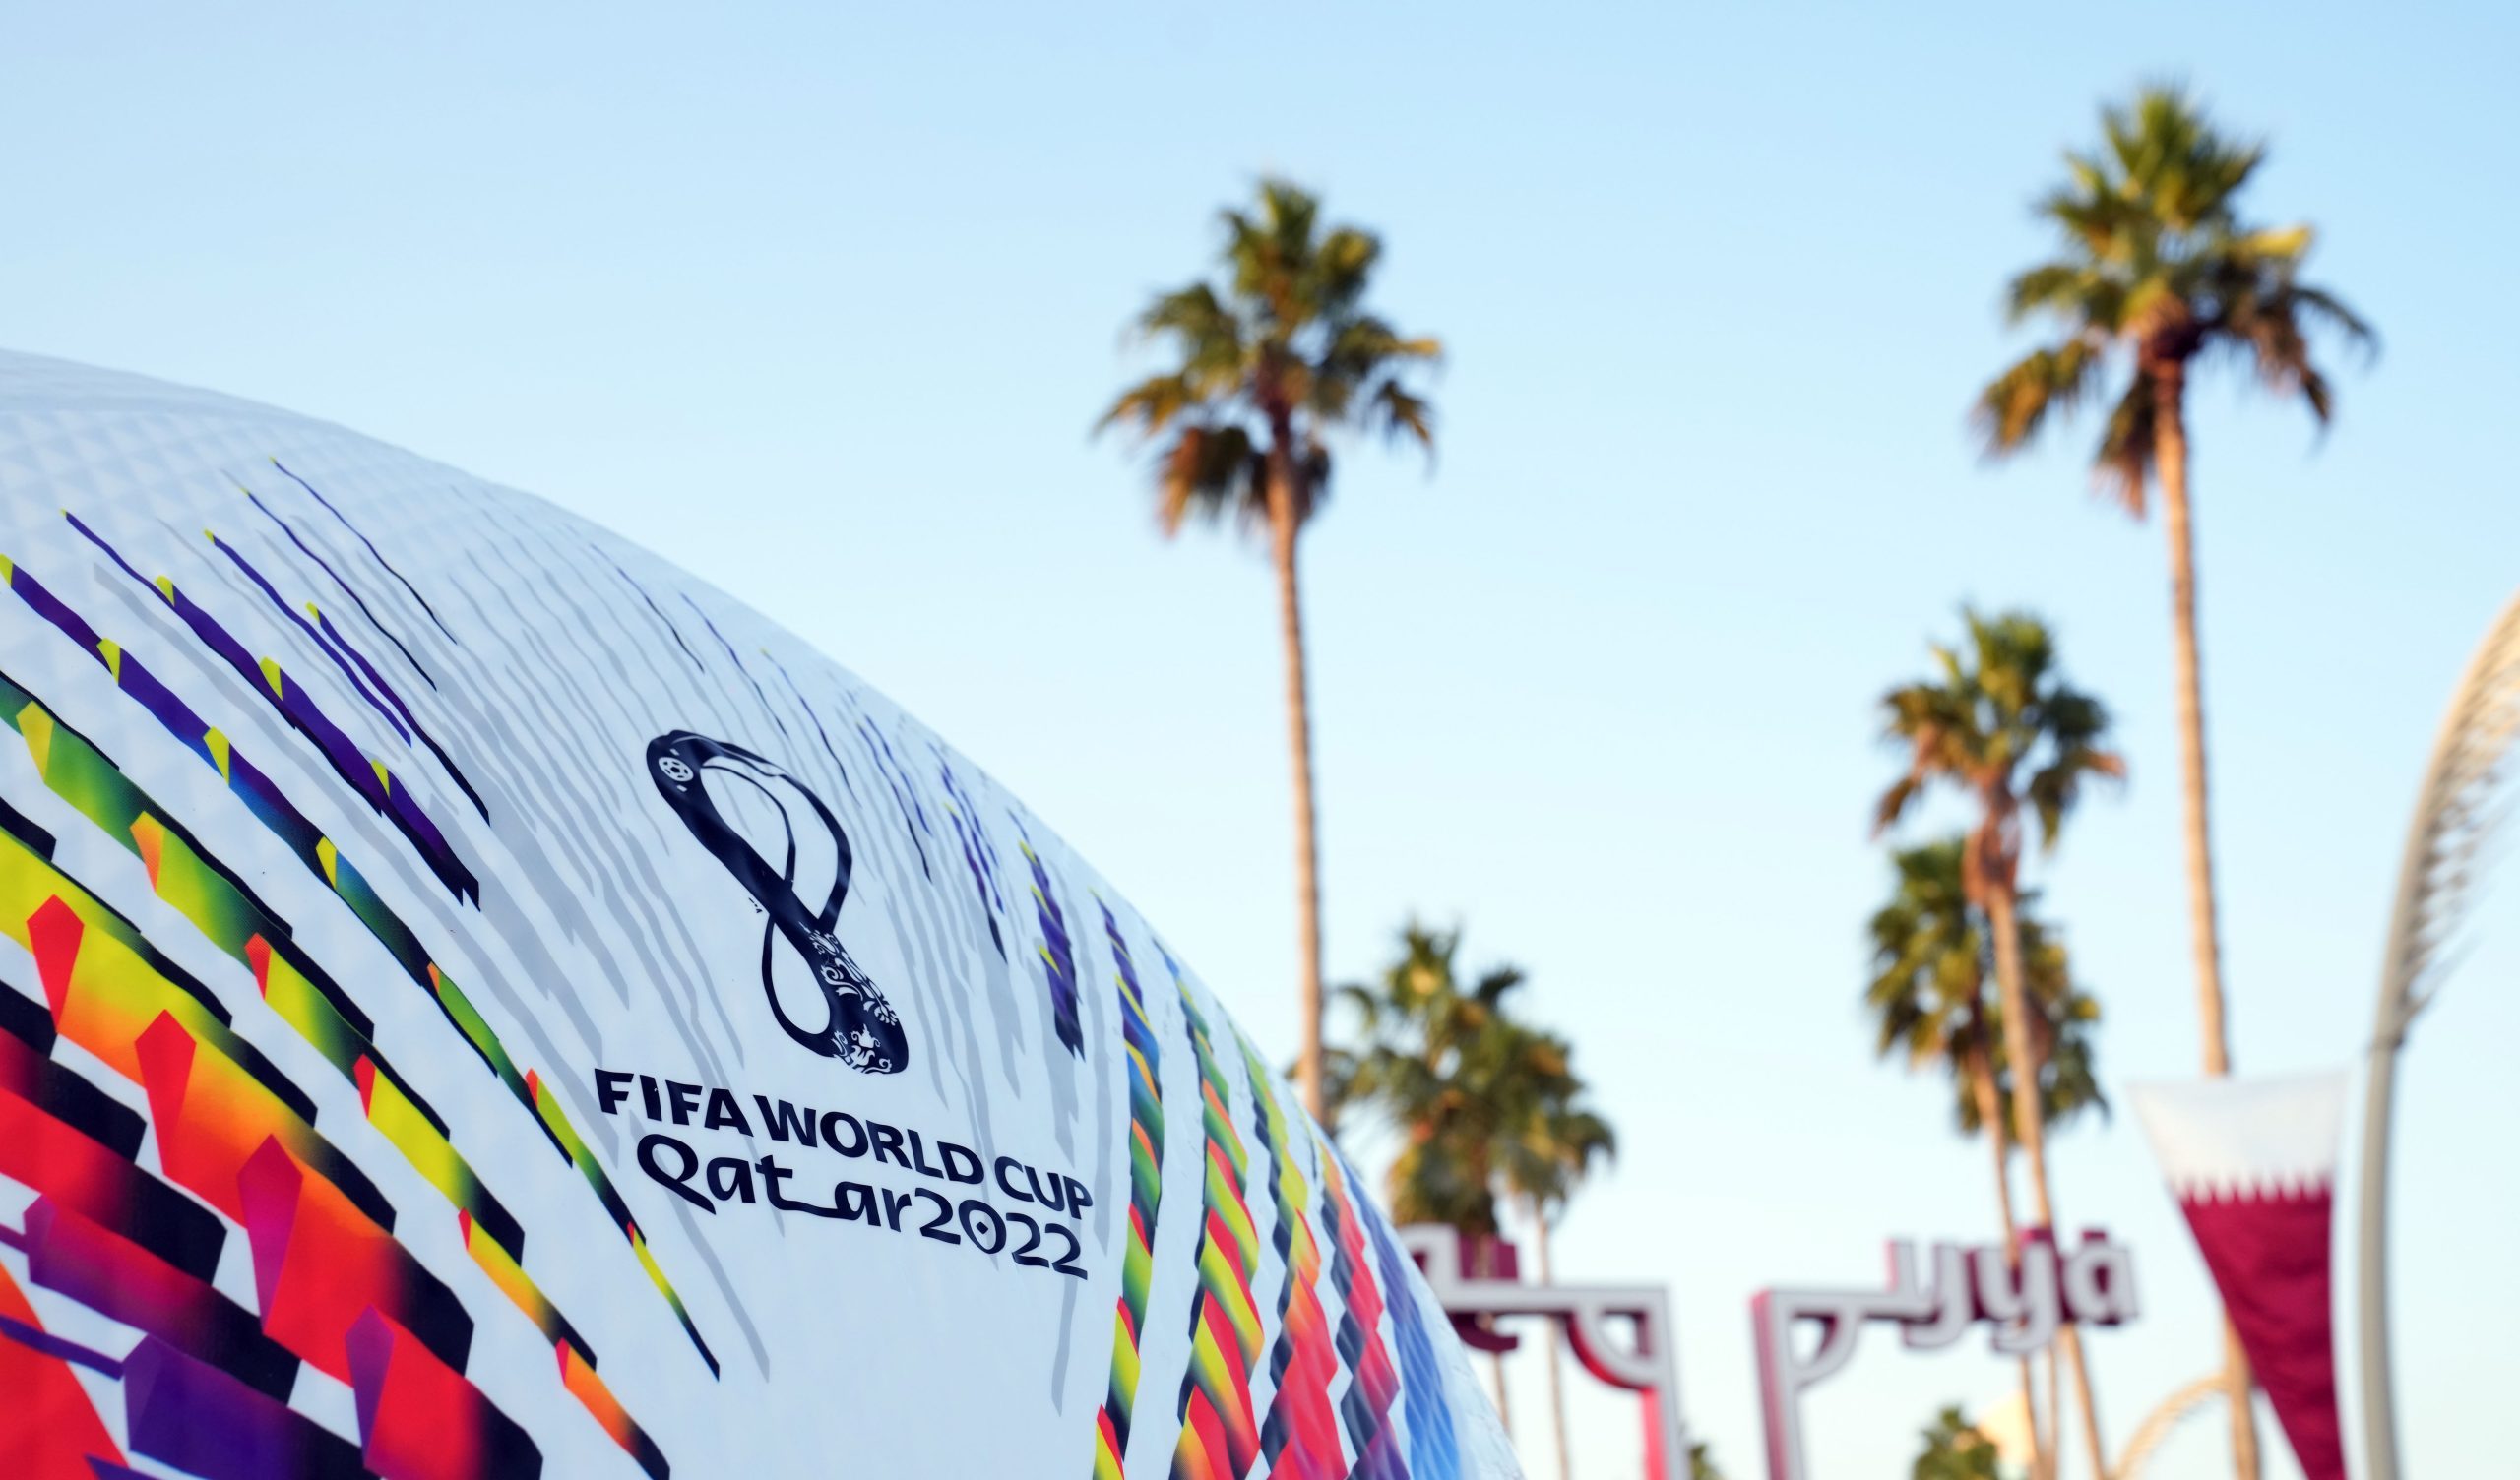 A giant soccer ball sits on the Corniche Waterfront ahead of the 2022 FIFA World Cup.